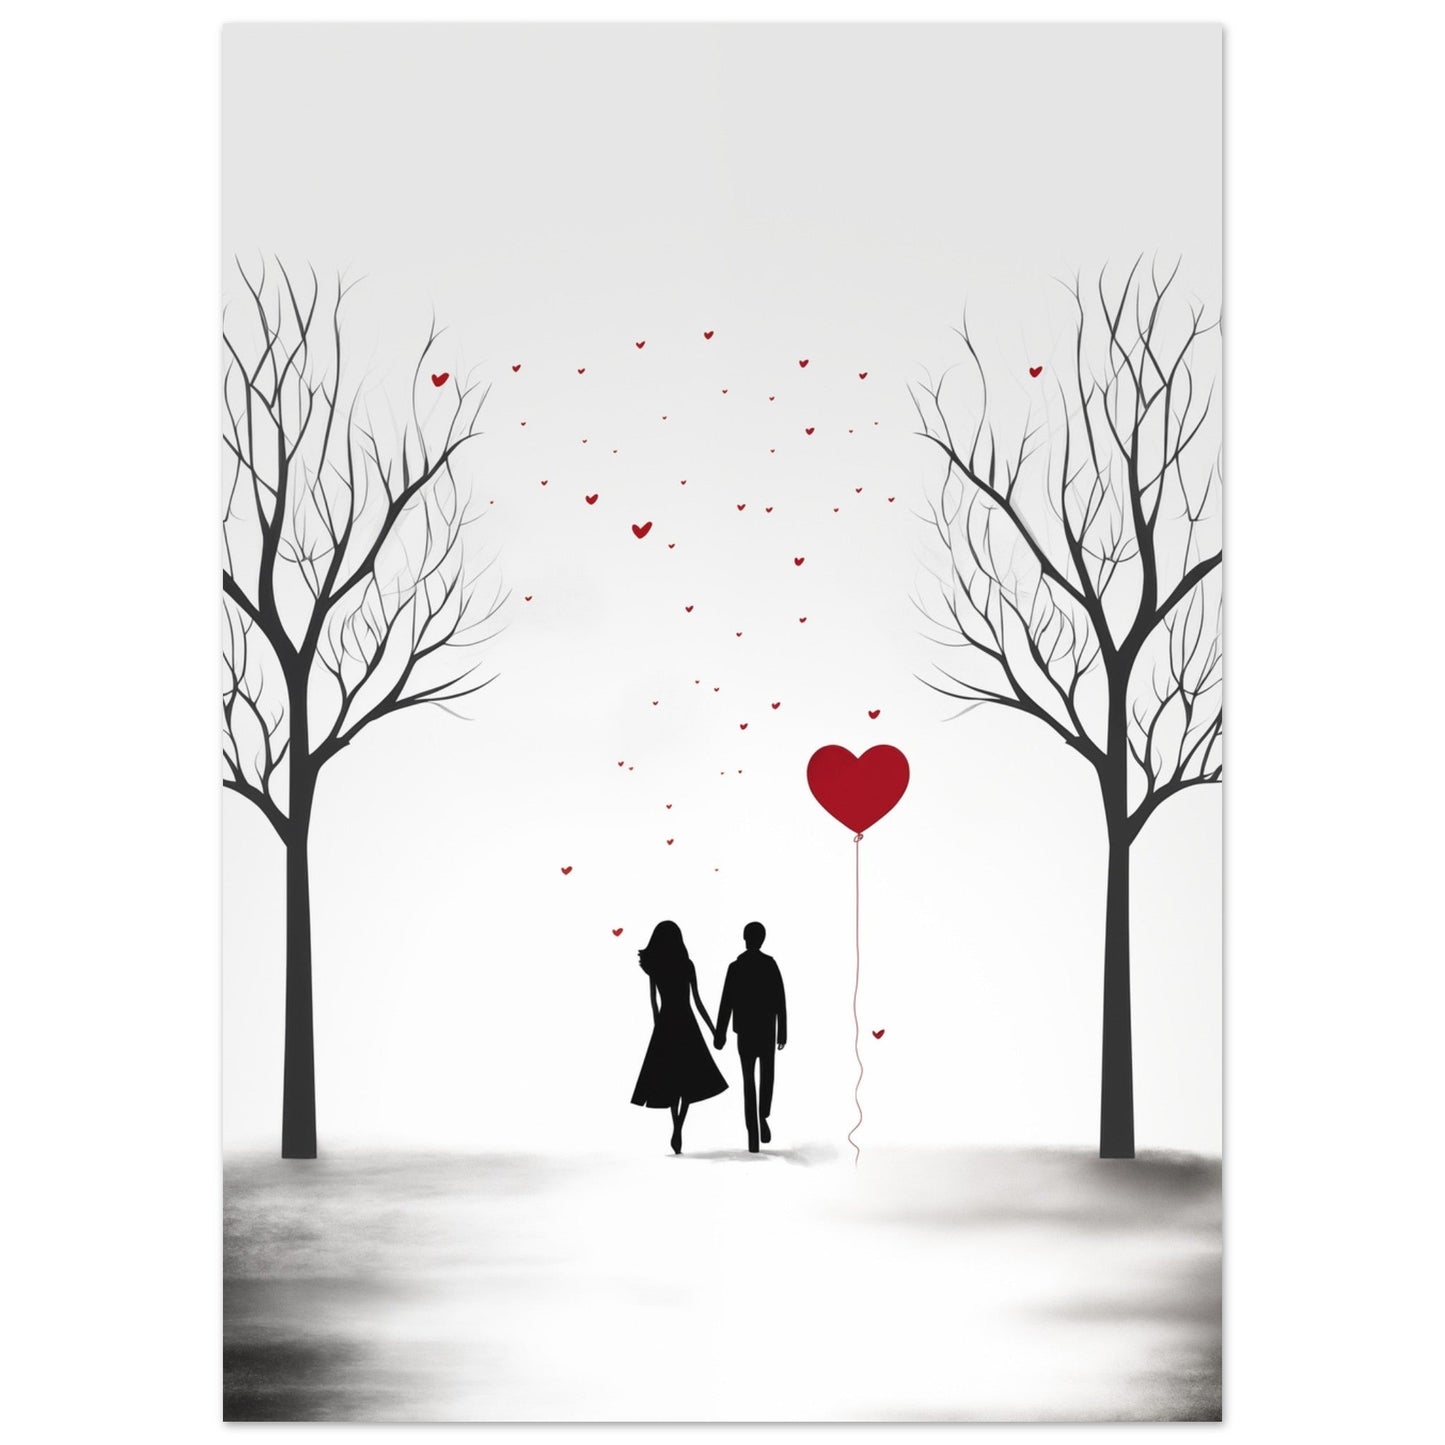 Valentine's day card featuring a heartfelt message for your loved one. This beautifully designed Amour valentine's day card is the perfect way to express your love and affection on this special day. Whether you